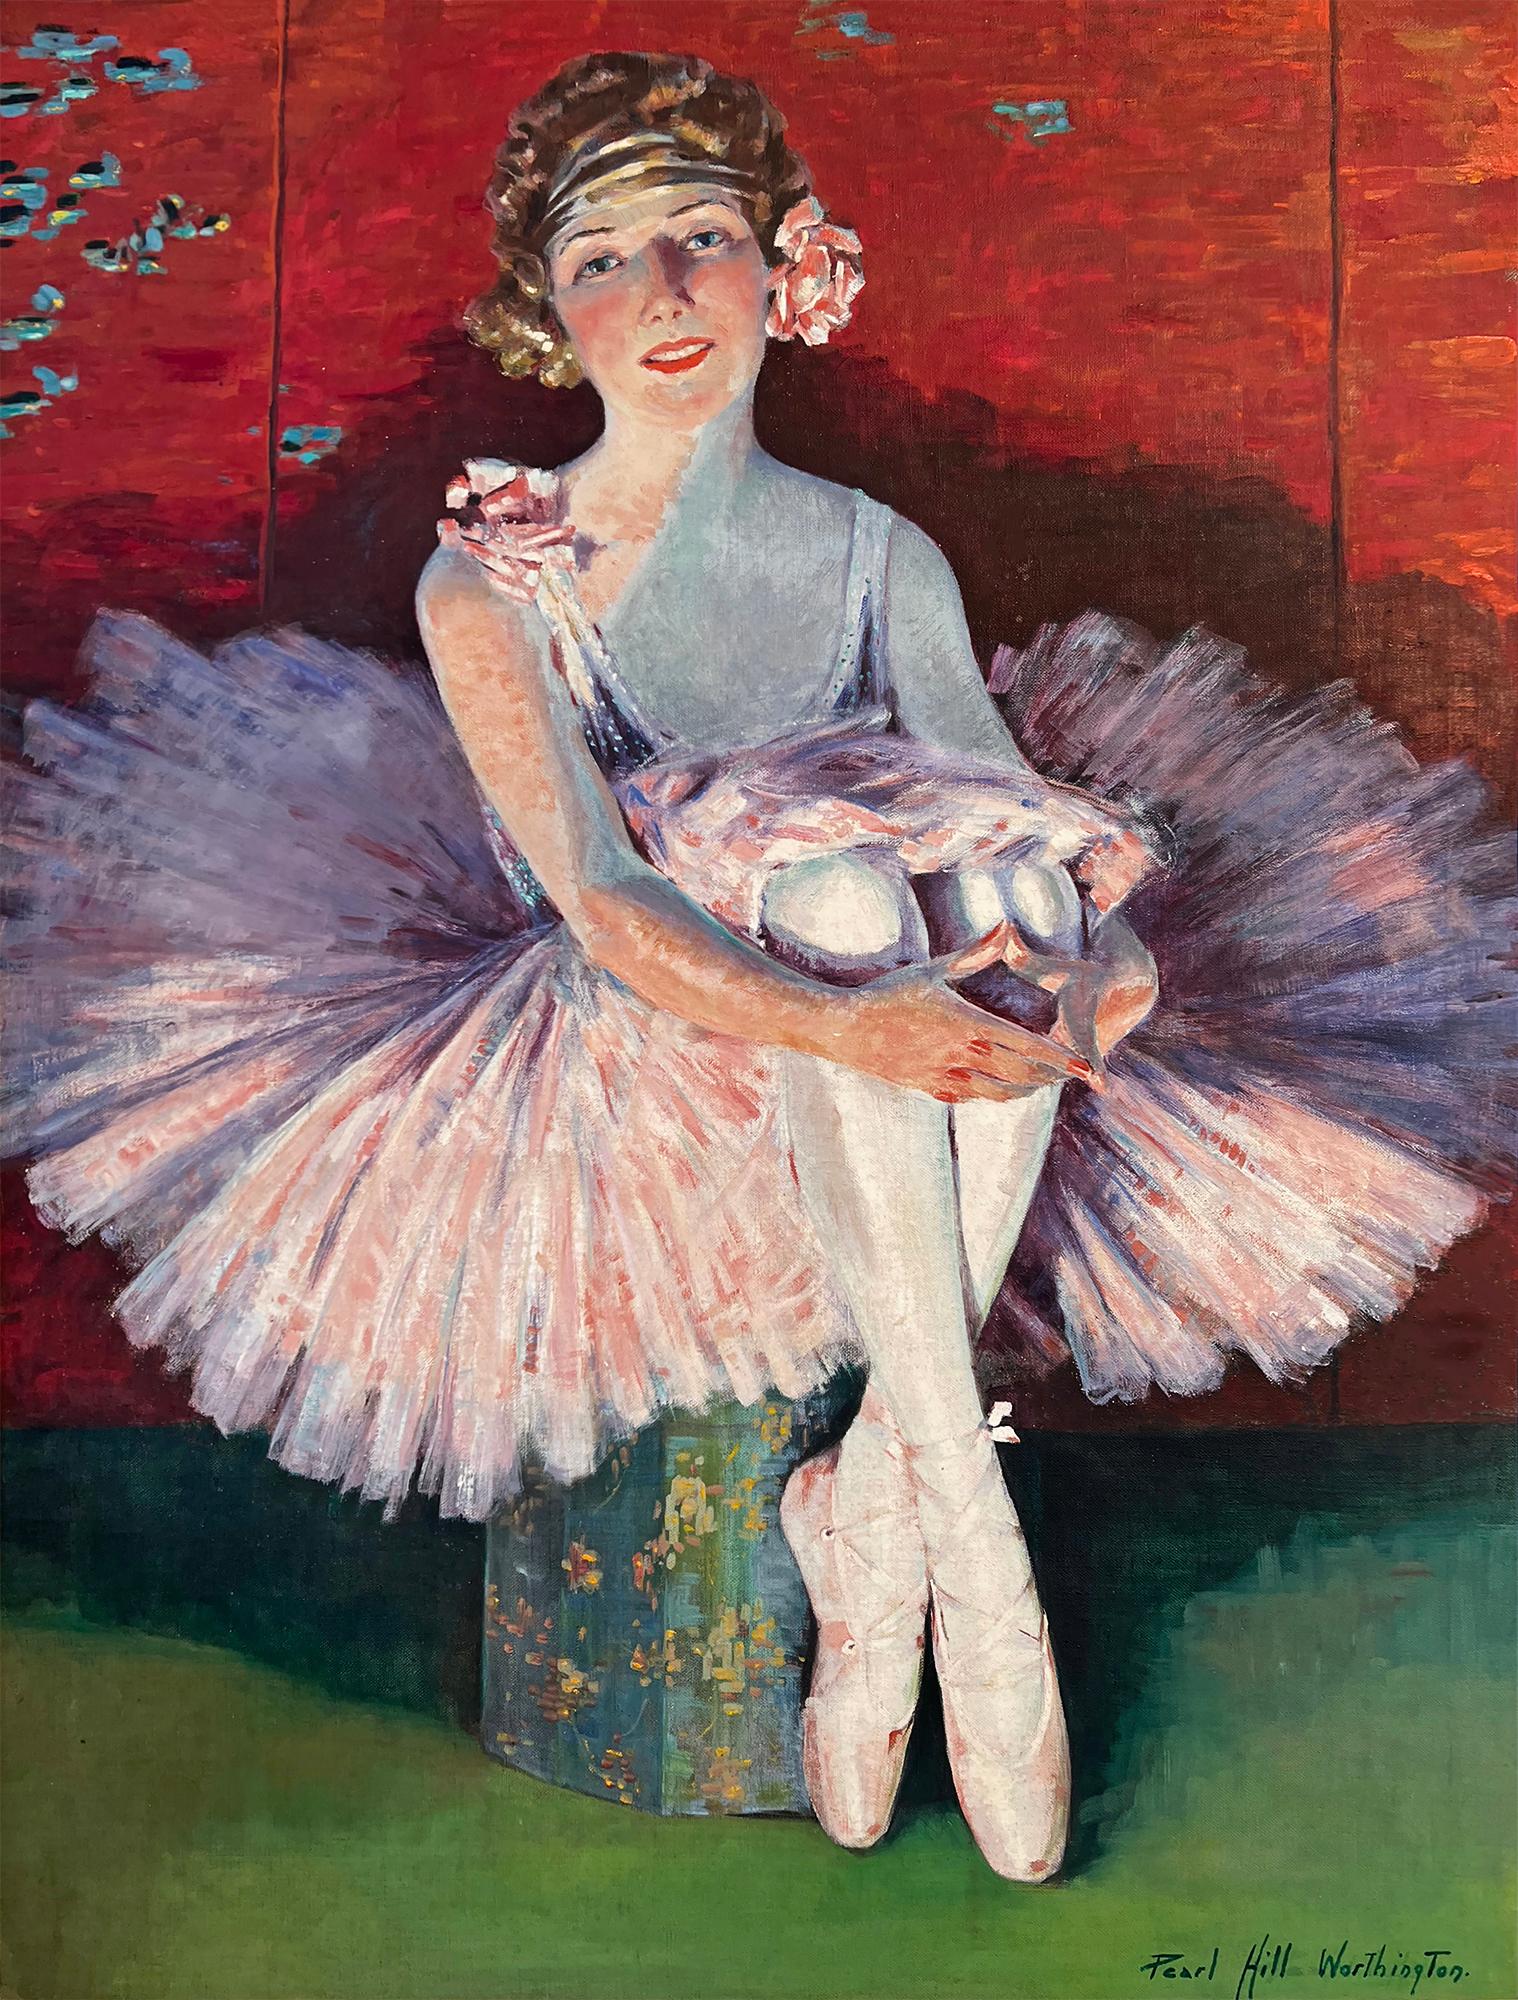 Pearl Hill Worthington Portrait Painting - Blond and Blue Eyed Ballerina in Tutu against Chinese Screen